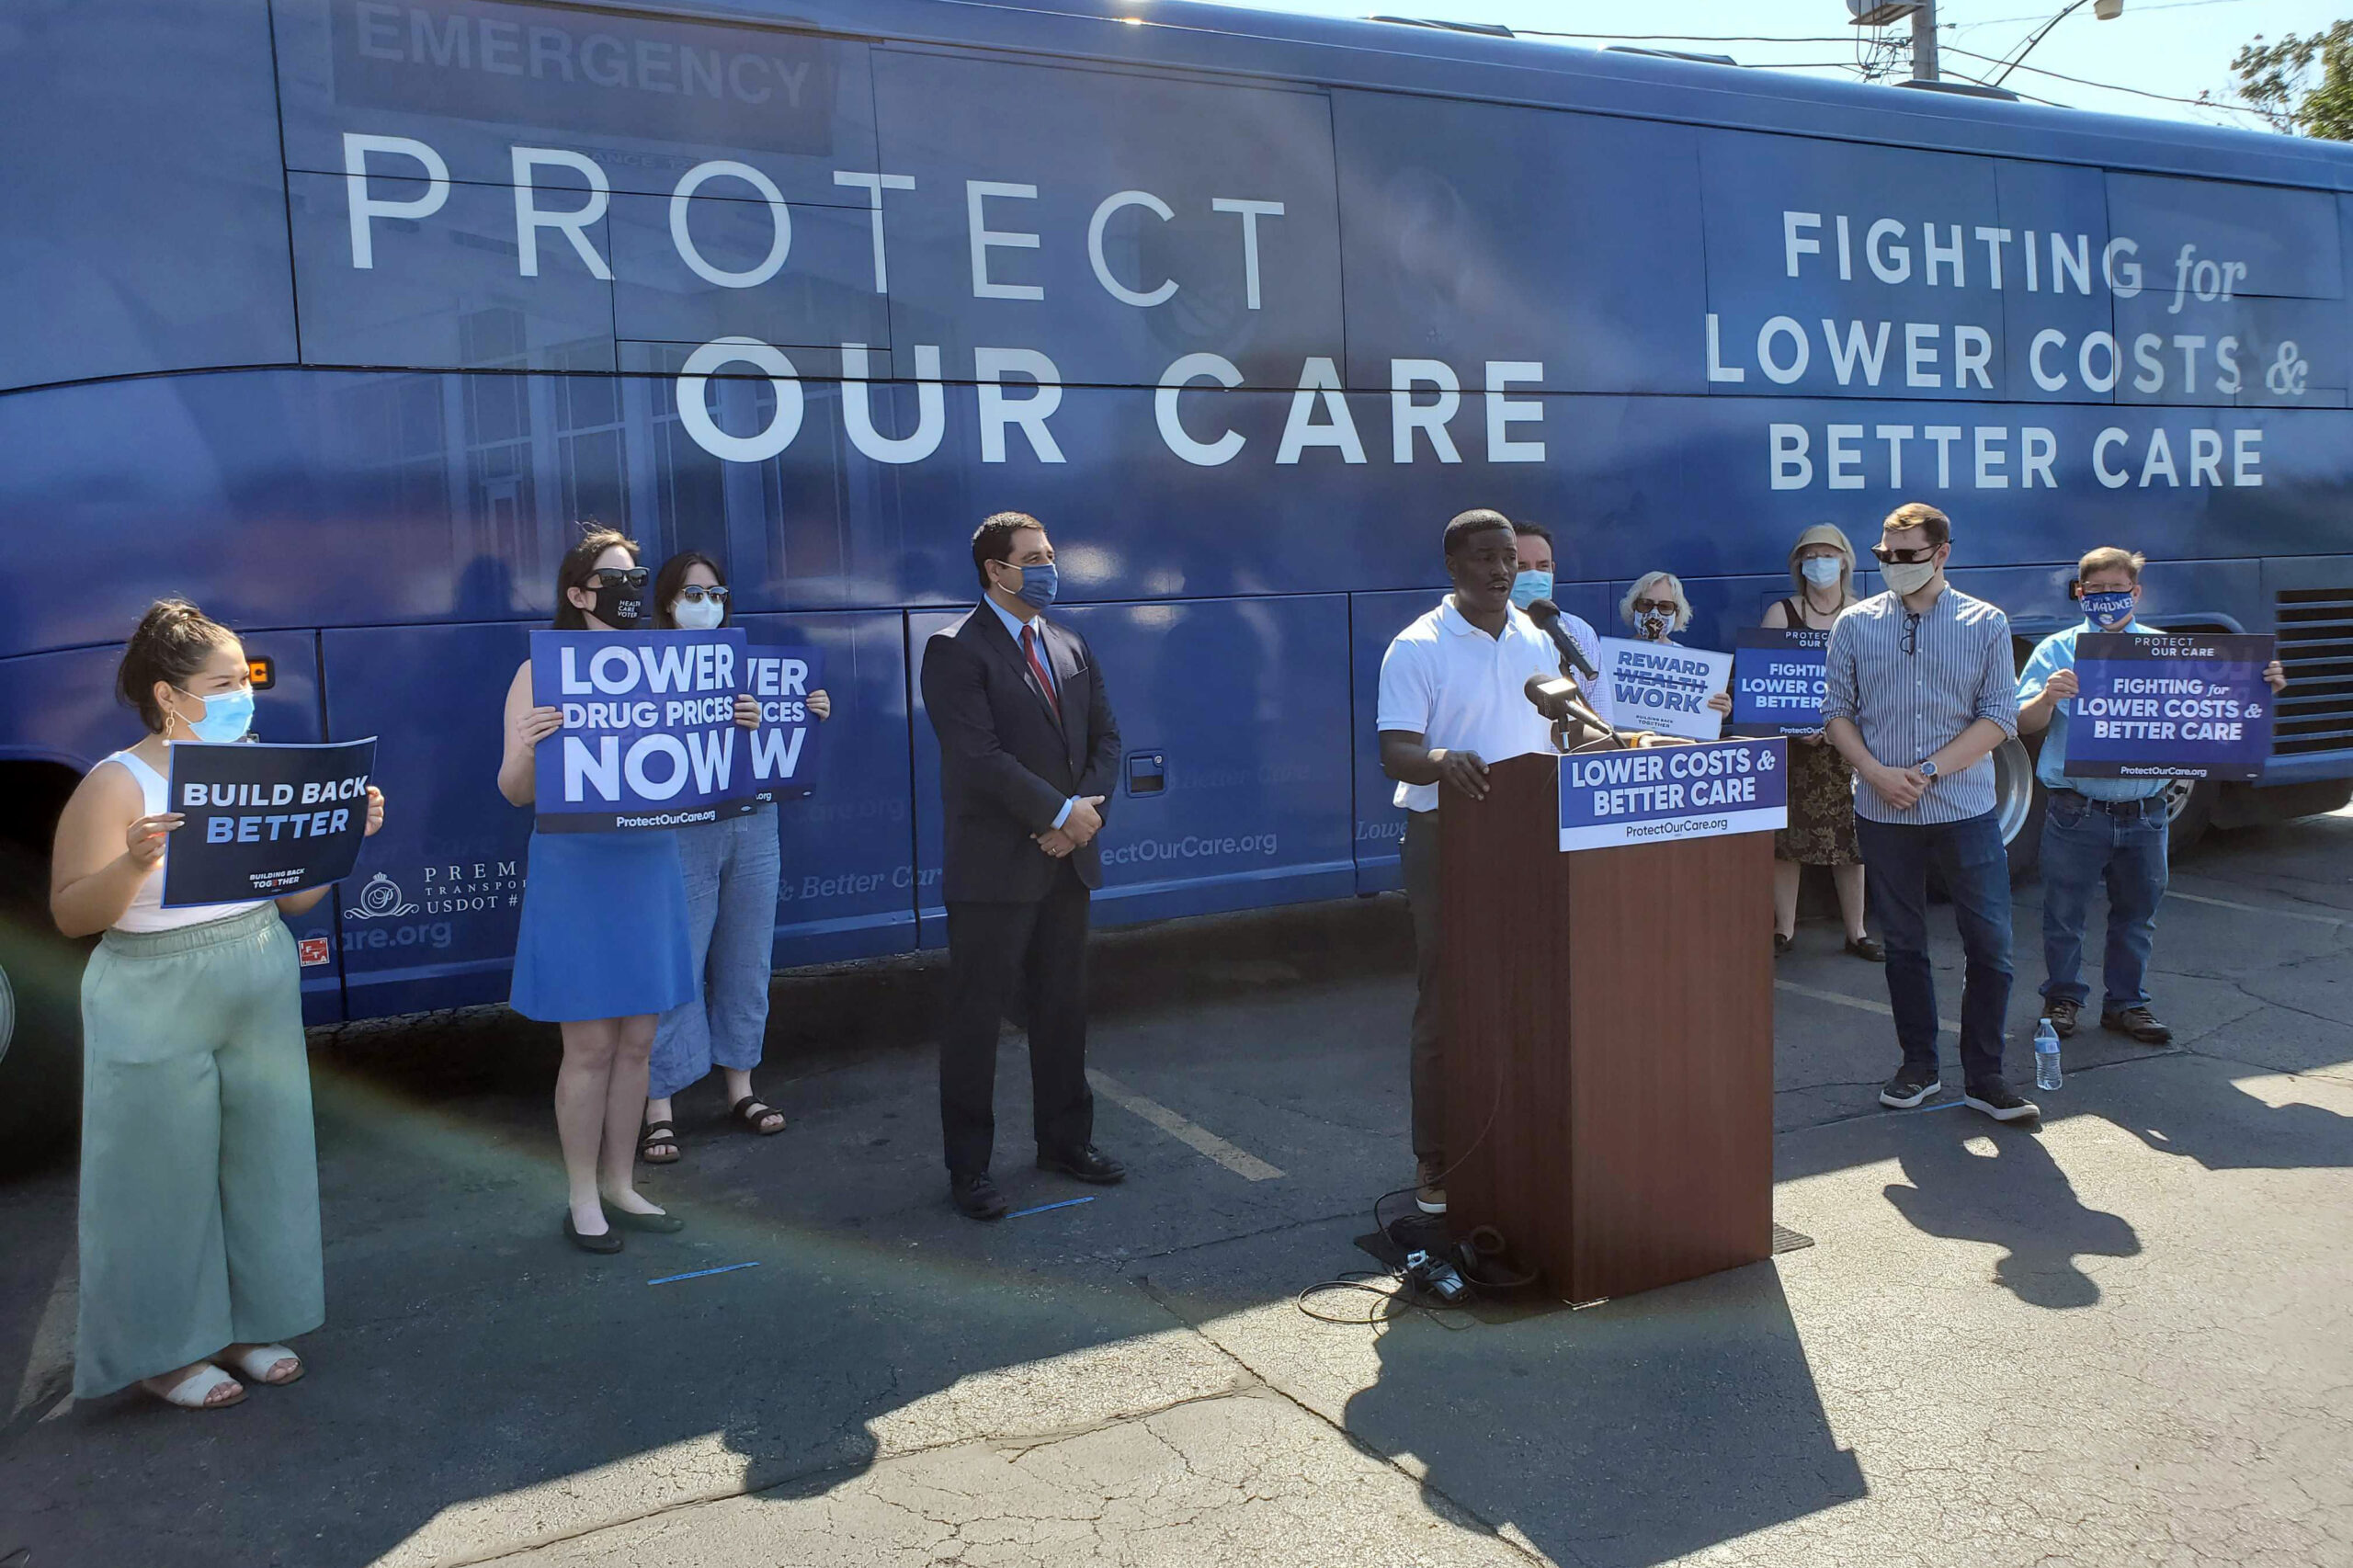 David Crowley speaks at an event calling for lower health care costs